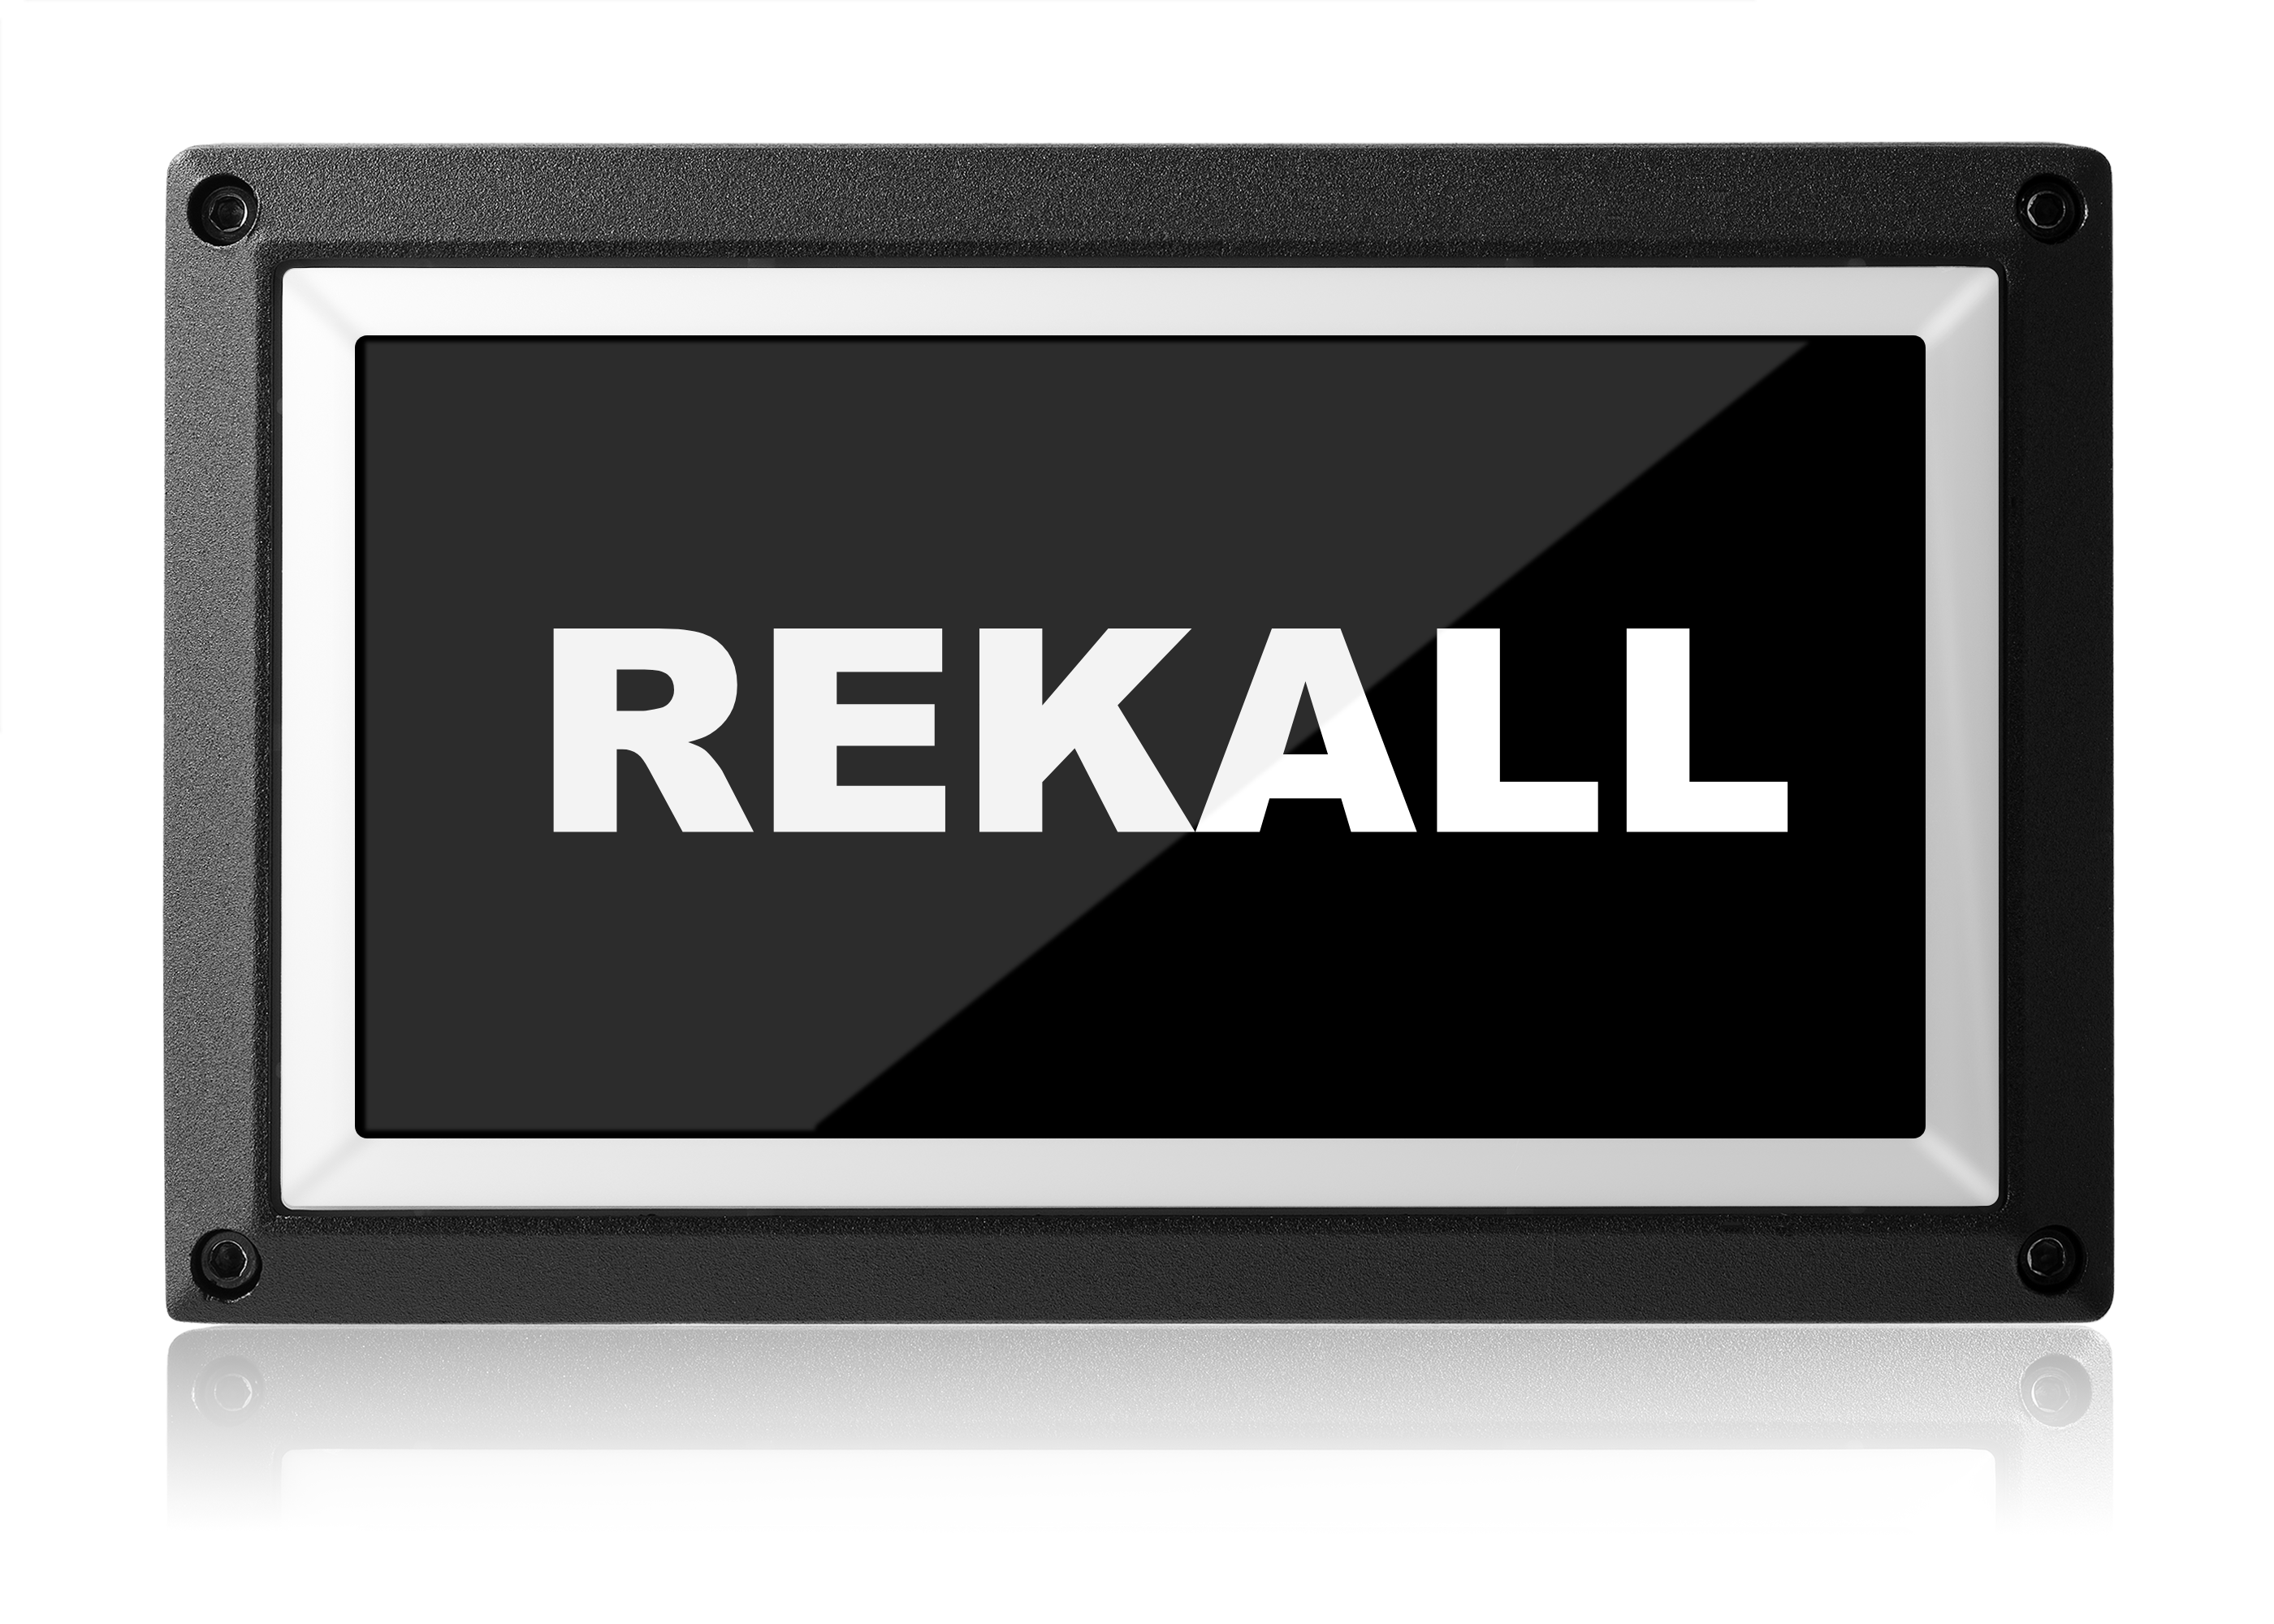 Authorised Personnel Only Light - Rekall Dynamics LED Sign-Black-Low Voltage (12-24v DC)-